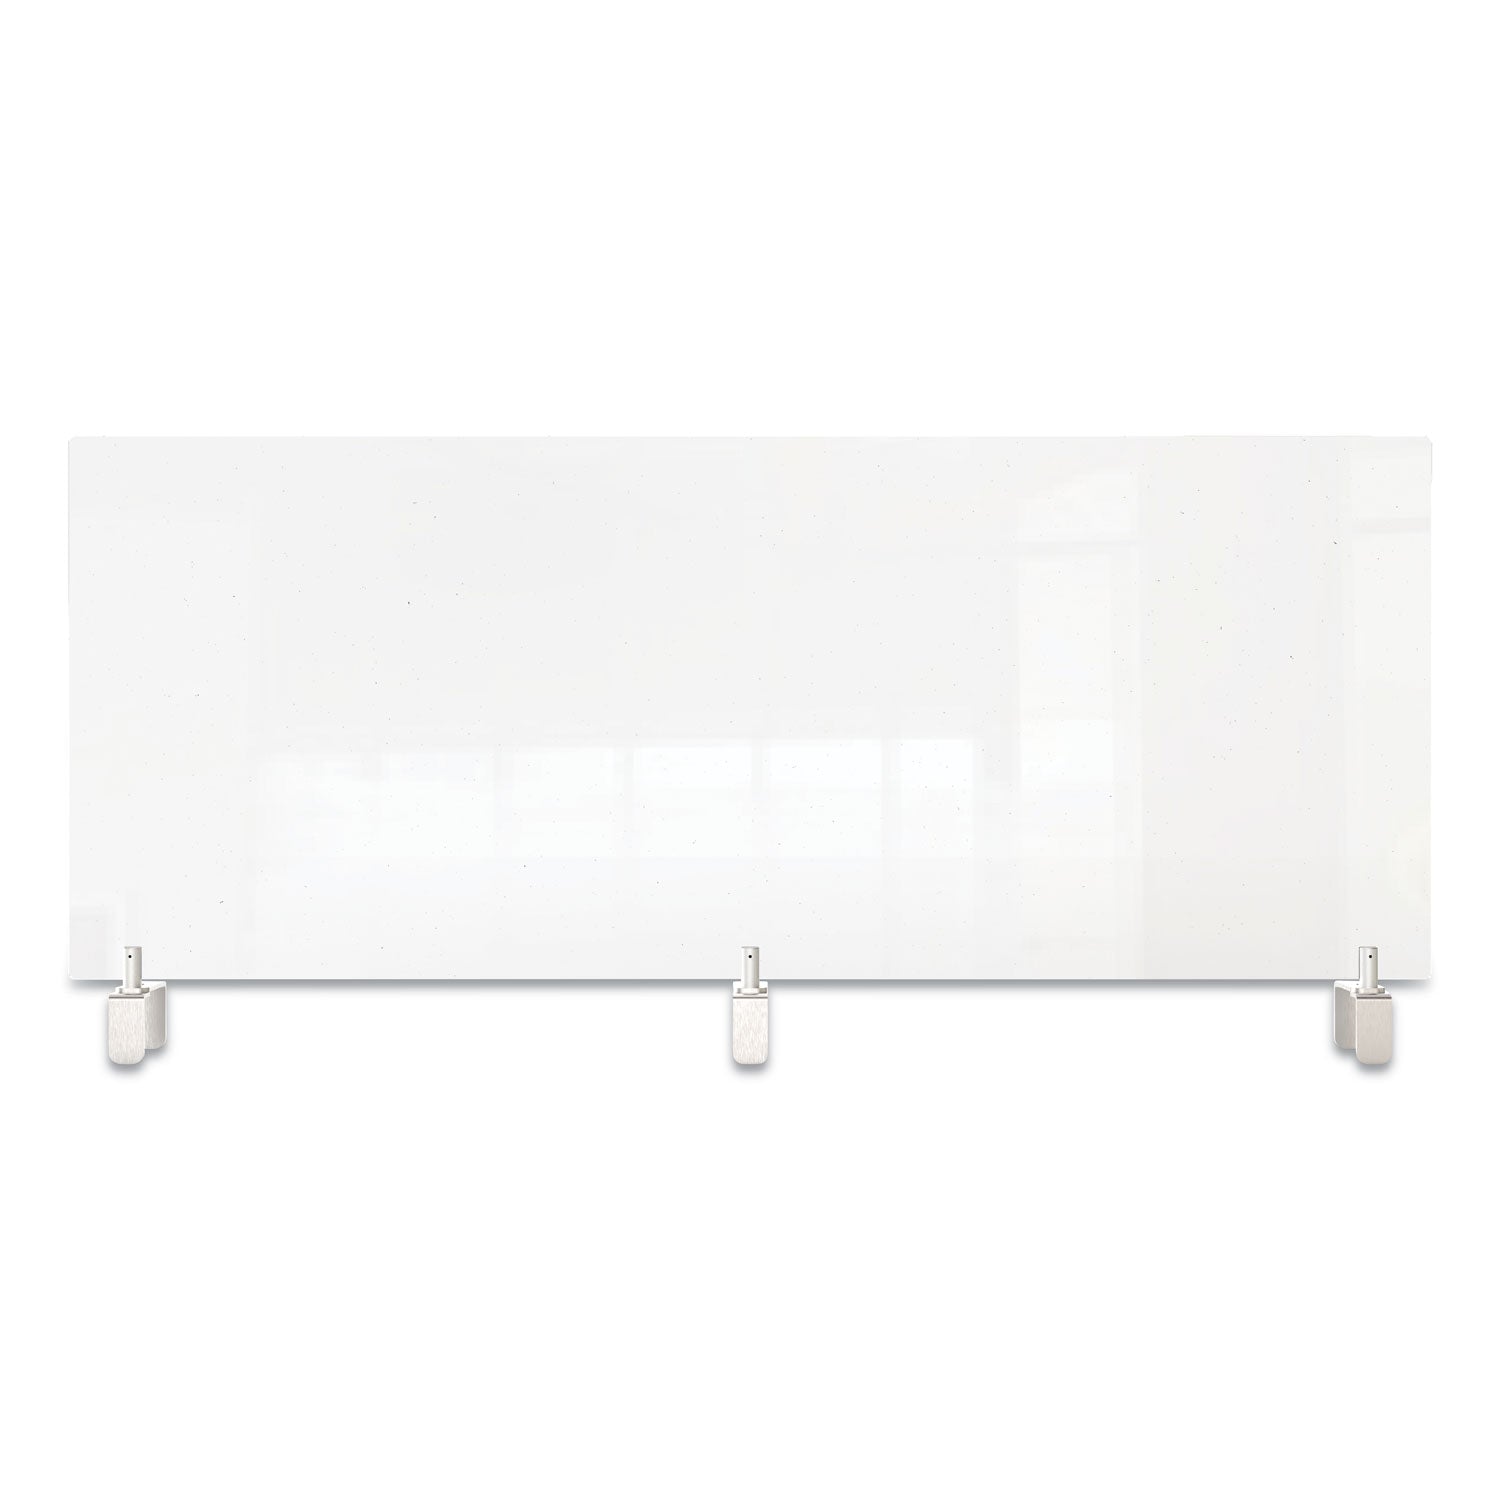 clear-partition-extender-with-attached-clamp-48-x-388-x-18-thermoplastic-sheeting_ghepec1848a - 3